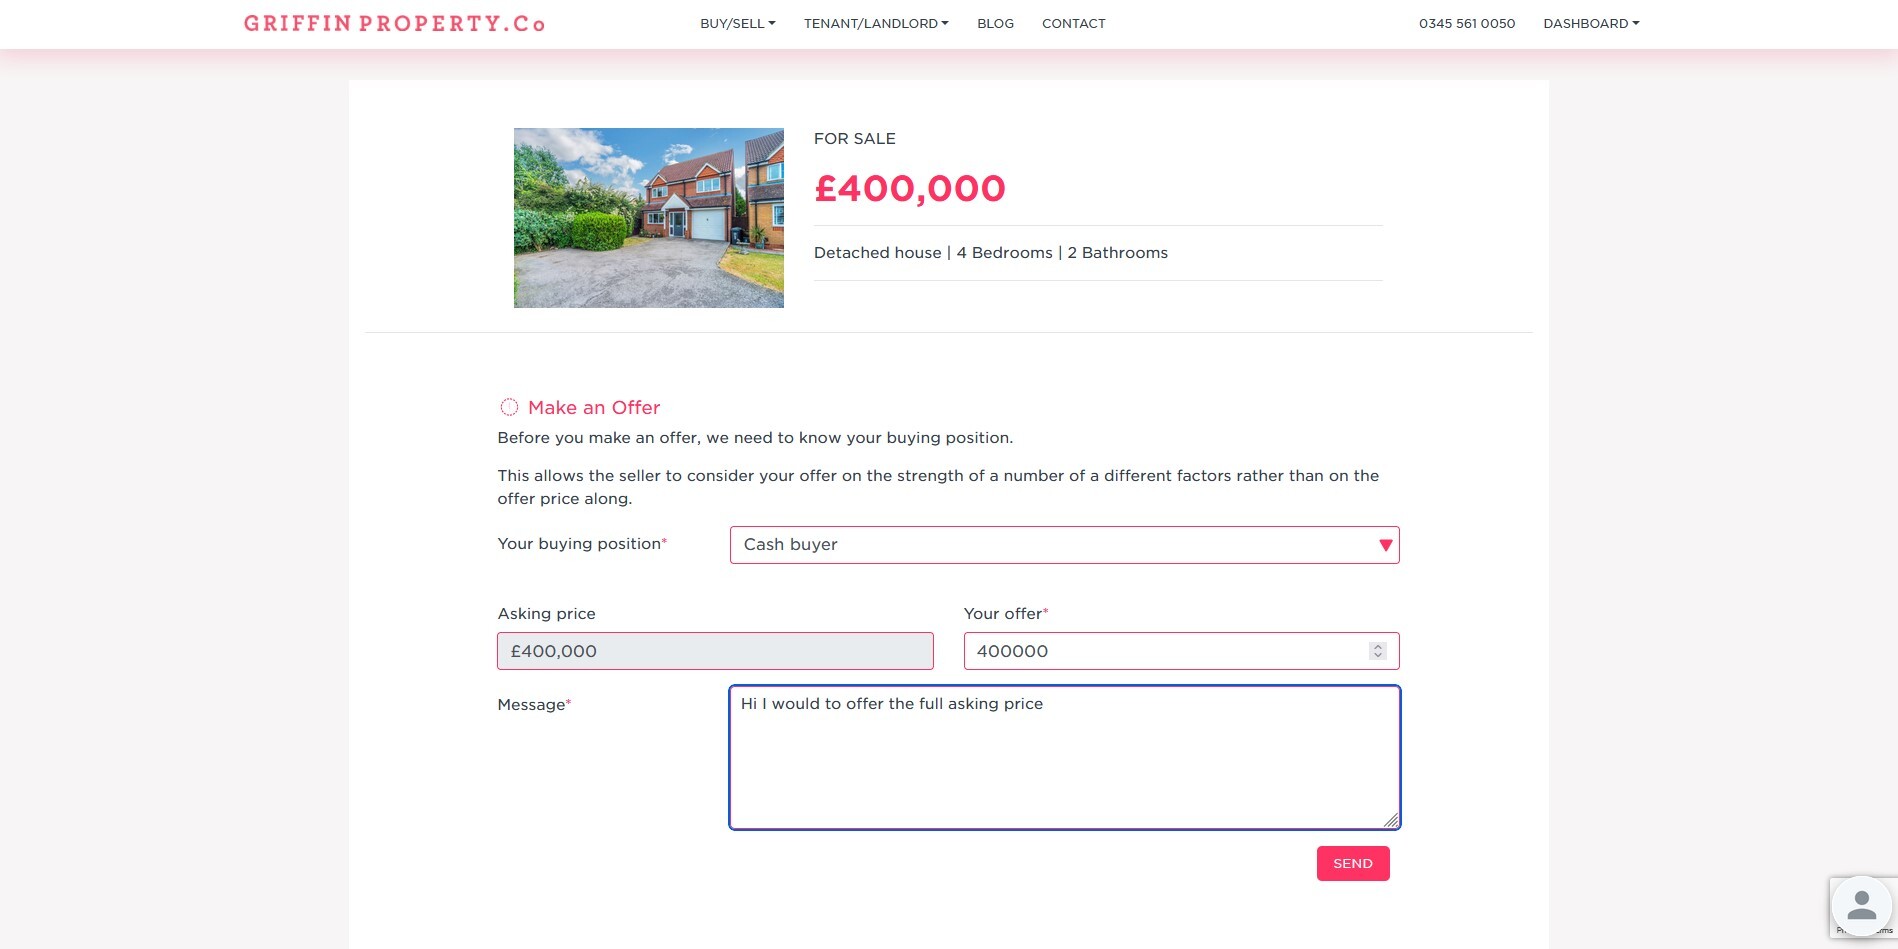 How to Manage Offers on the Griffin Property Co Website